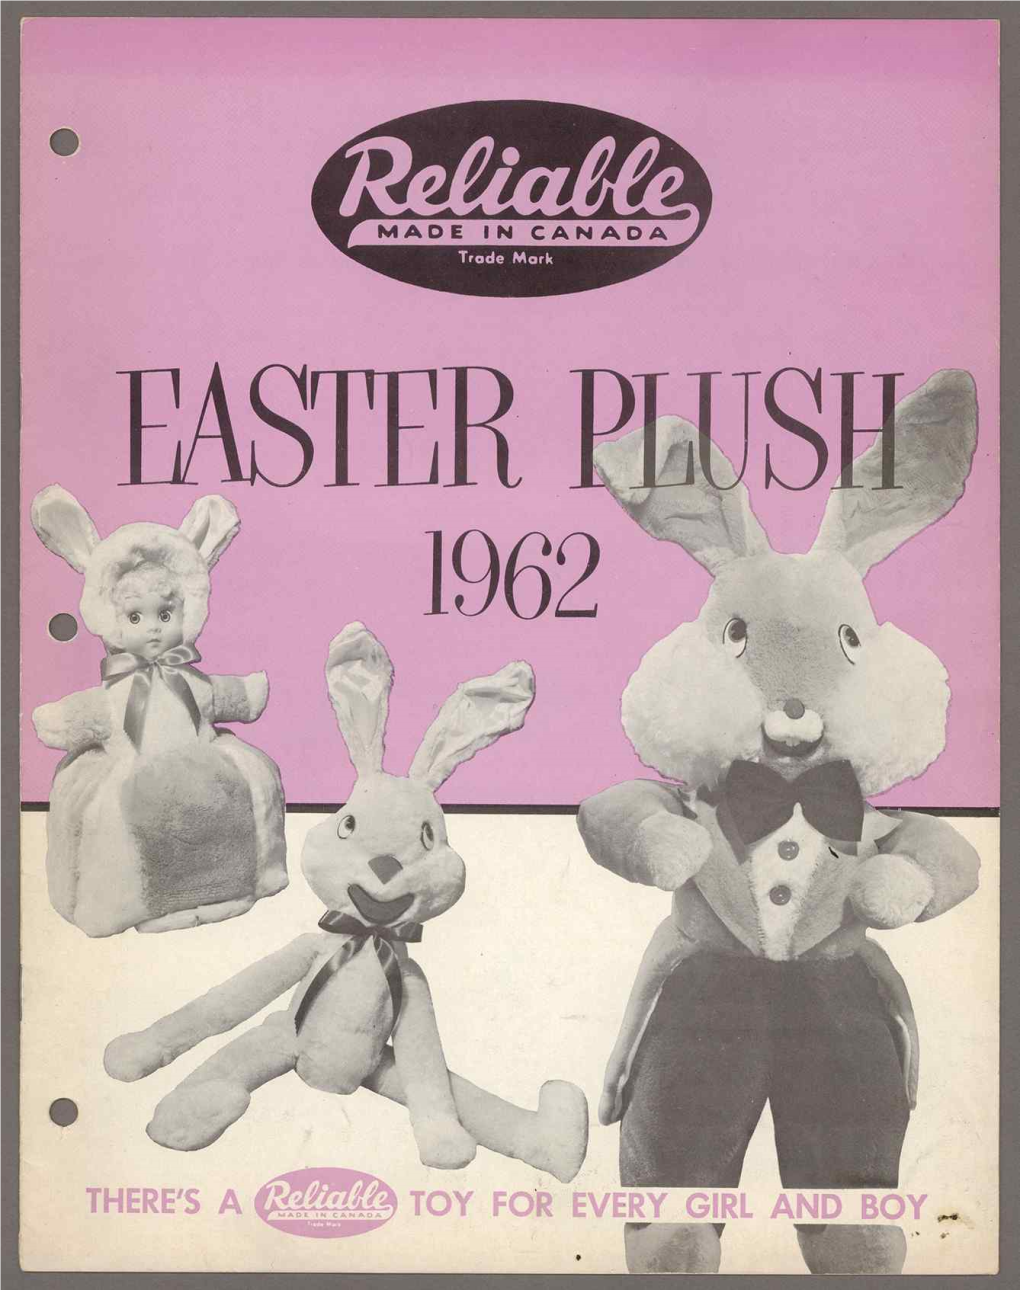 EASTER PLUSH ASSORTMENT Consists of 12 Items, 2 Each of the Following Numbers: 79002, 79042, 79092, 79502, 79632, 79642